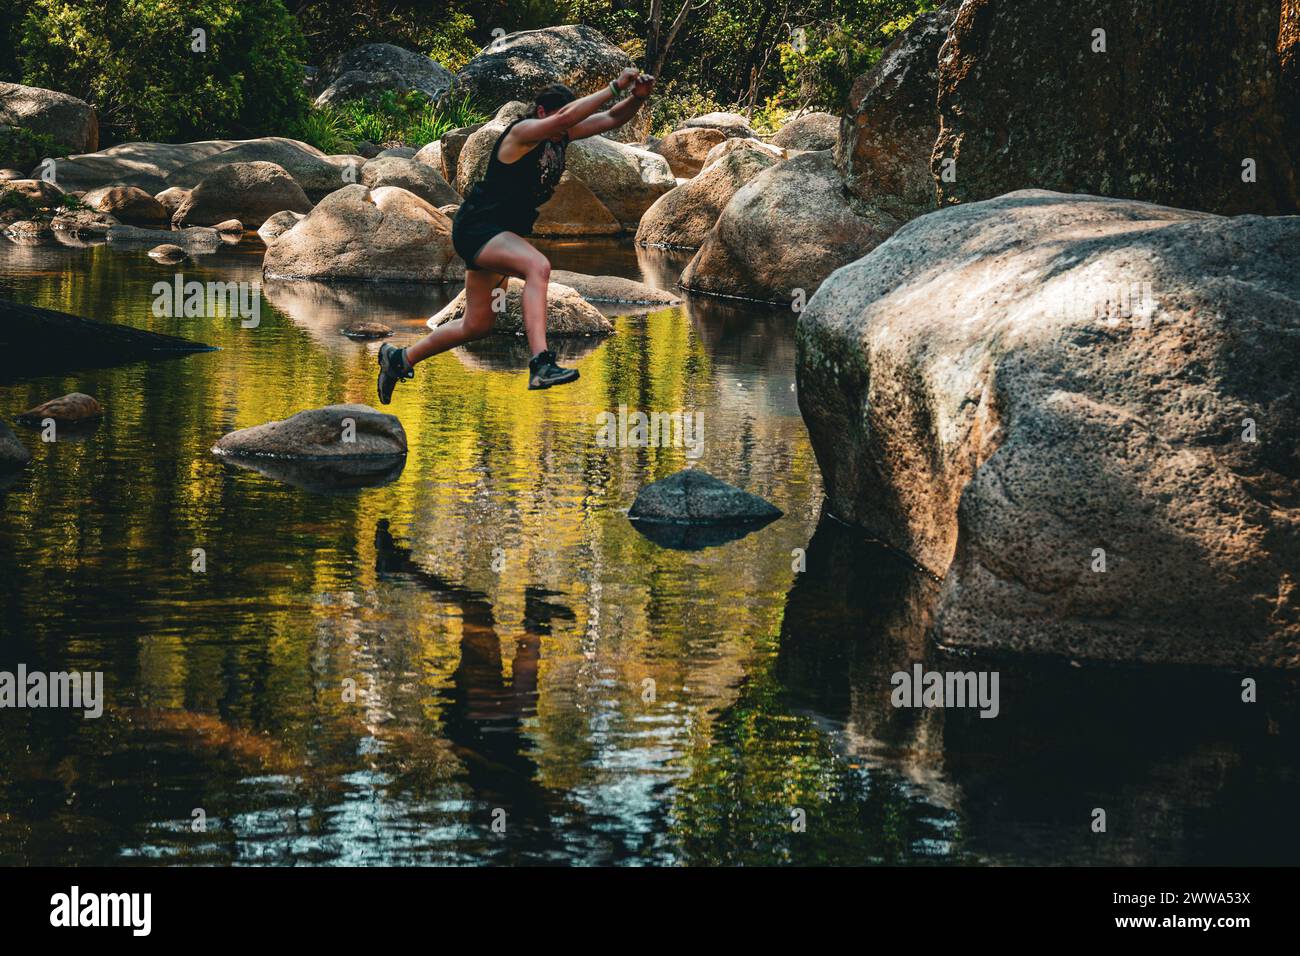 Hiker dynamically jumping across river stones surrounded by serene nature. Stock Photo